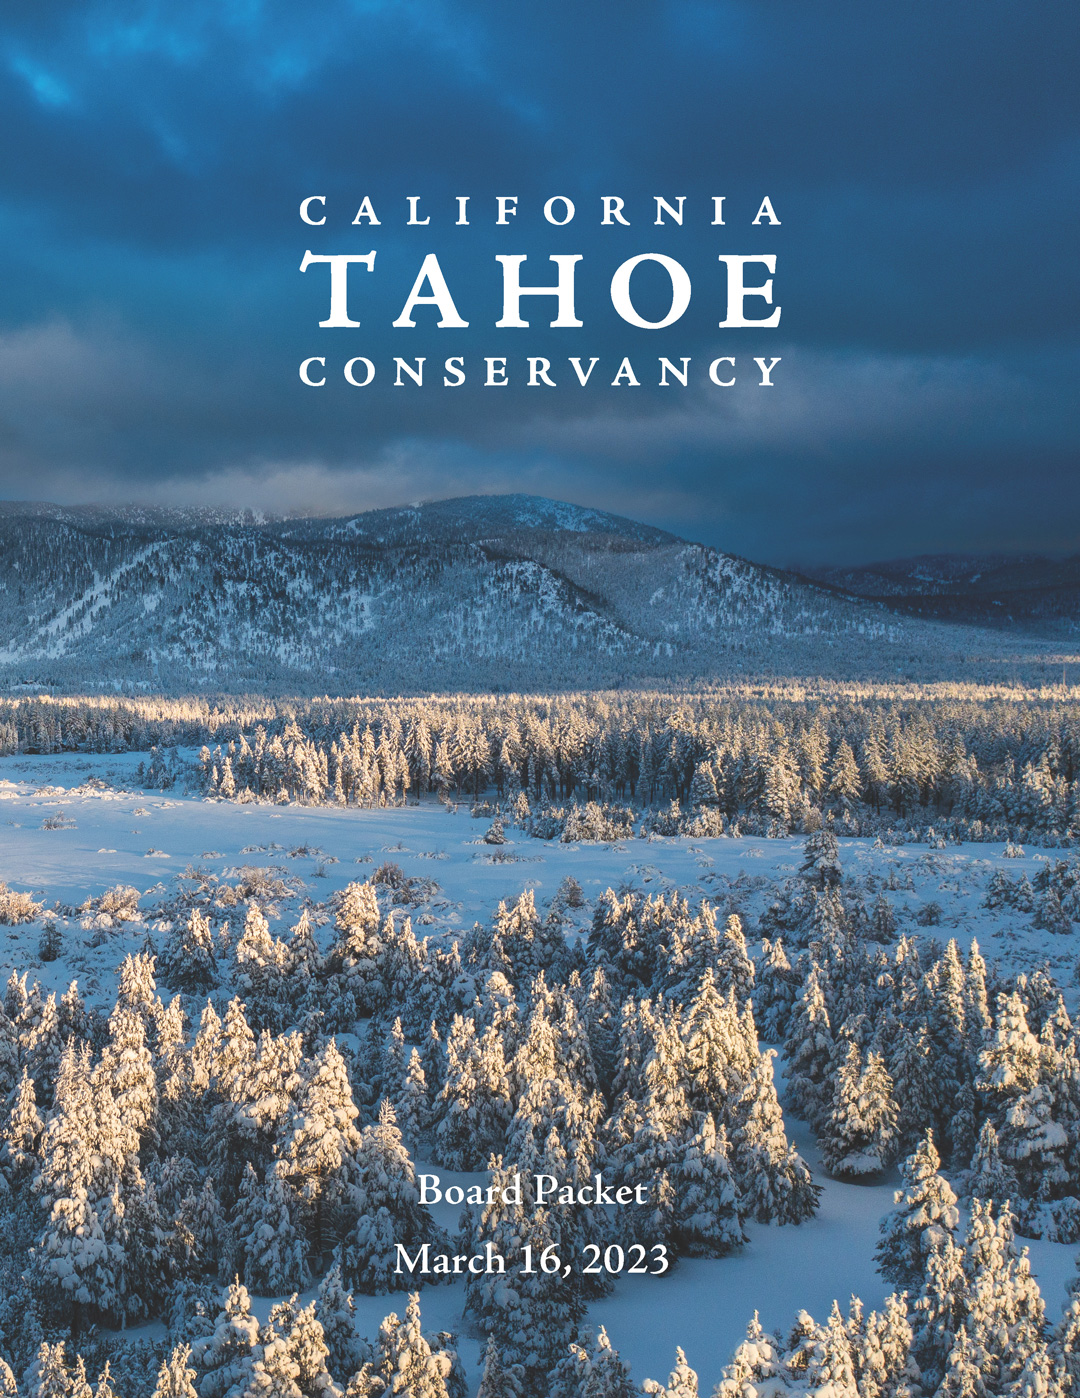 Snow on trees and meadows with mountains behind, and text saying California Tahoe Conservancy Board Book March 16, 2023